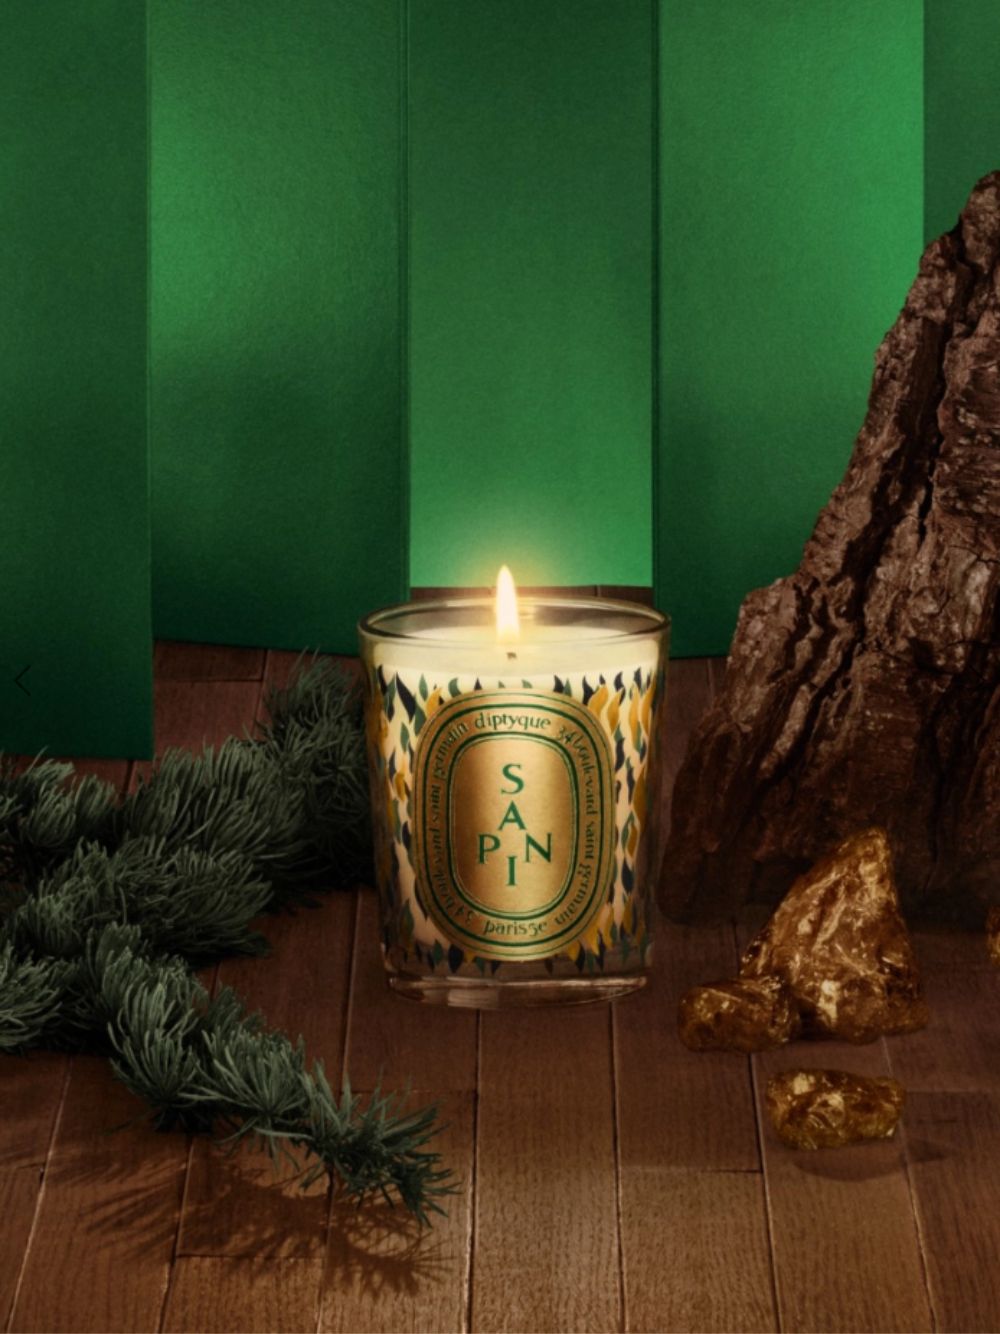 DiptyqueSapin Classic Candle 190g at Fashion Clinic